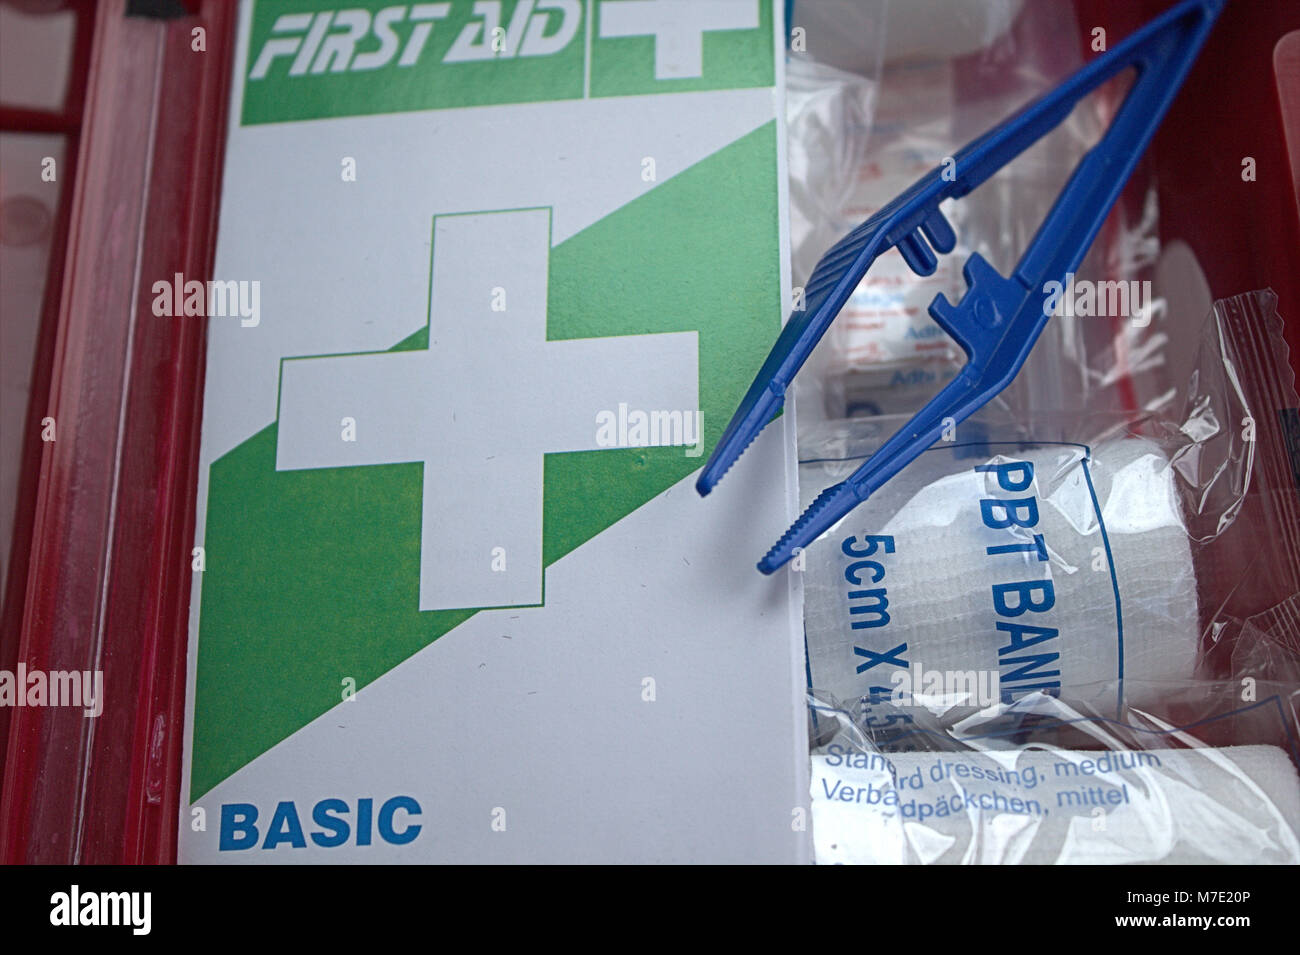 Contents of a car first aid kit. Stock Photo